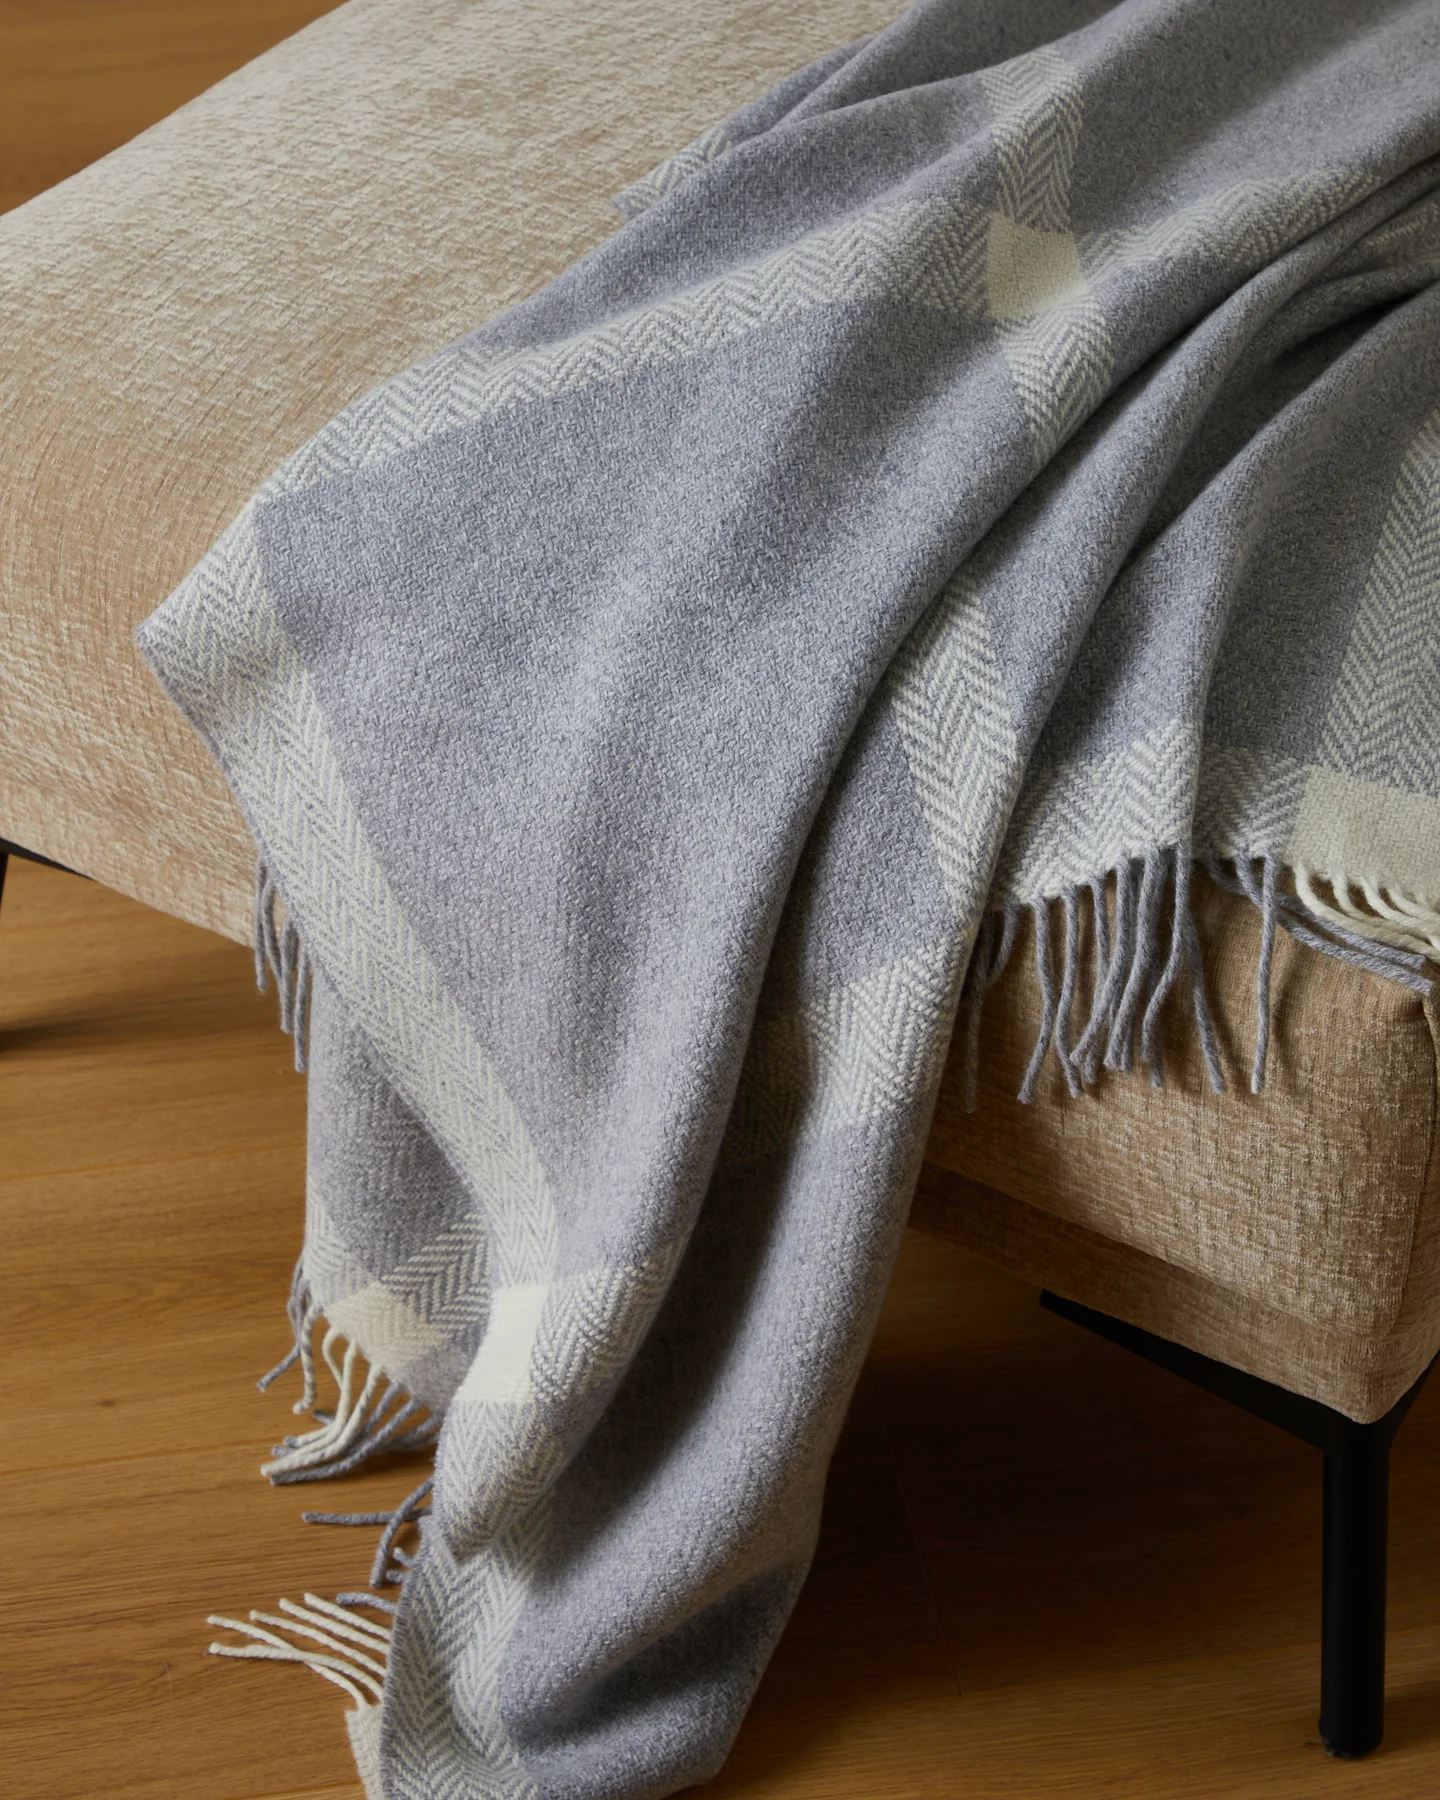 Foxford wool-cashmere blend blanket in gray and white plaid 